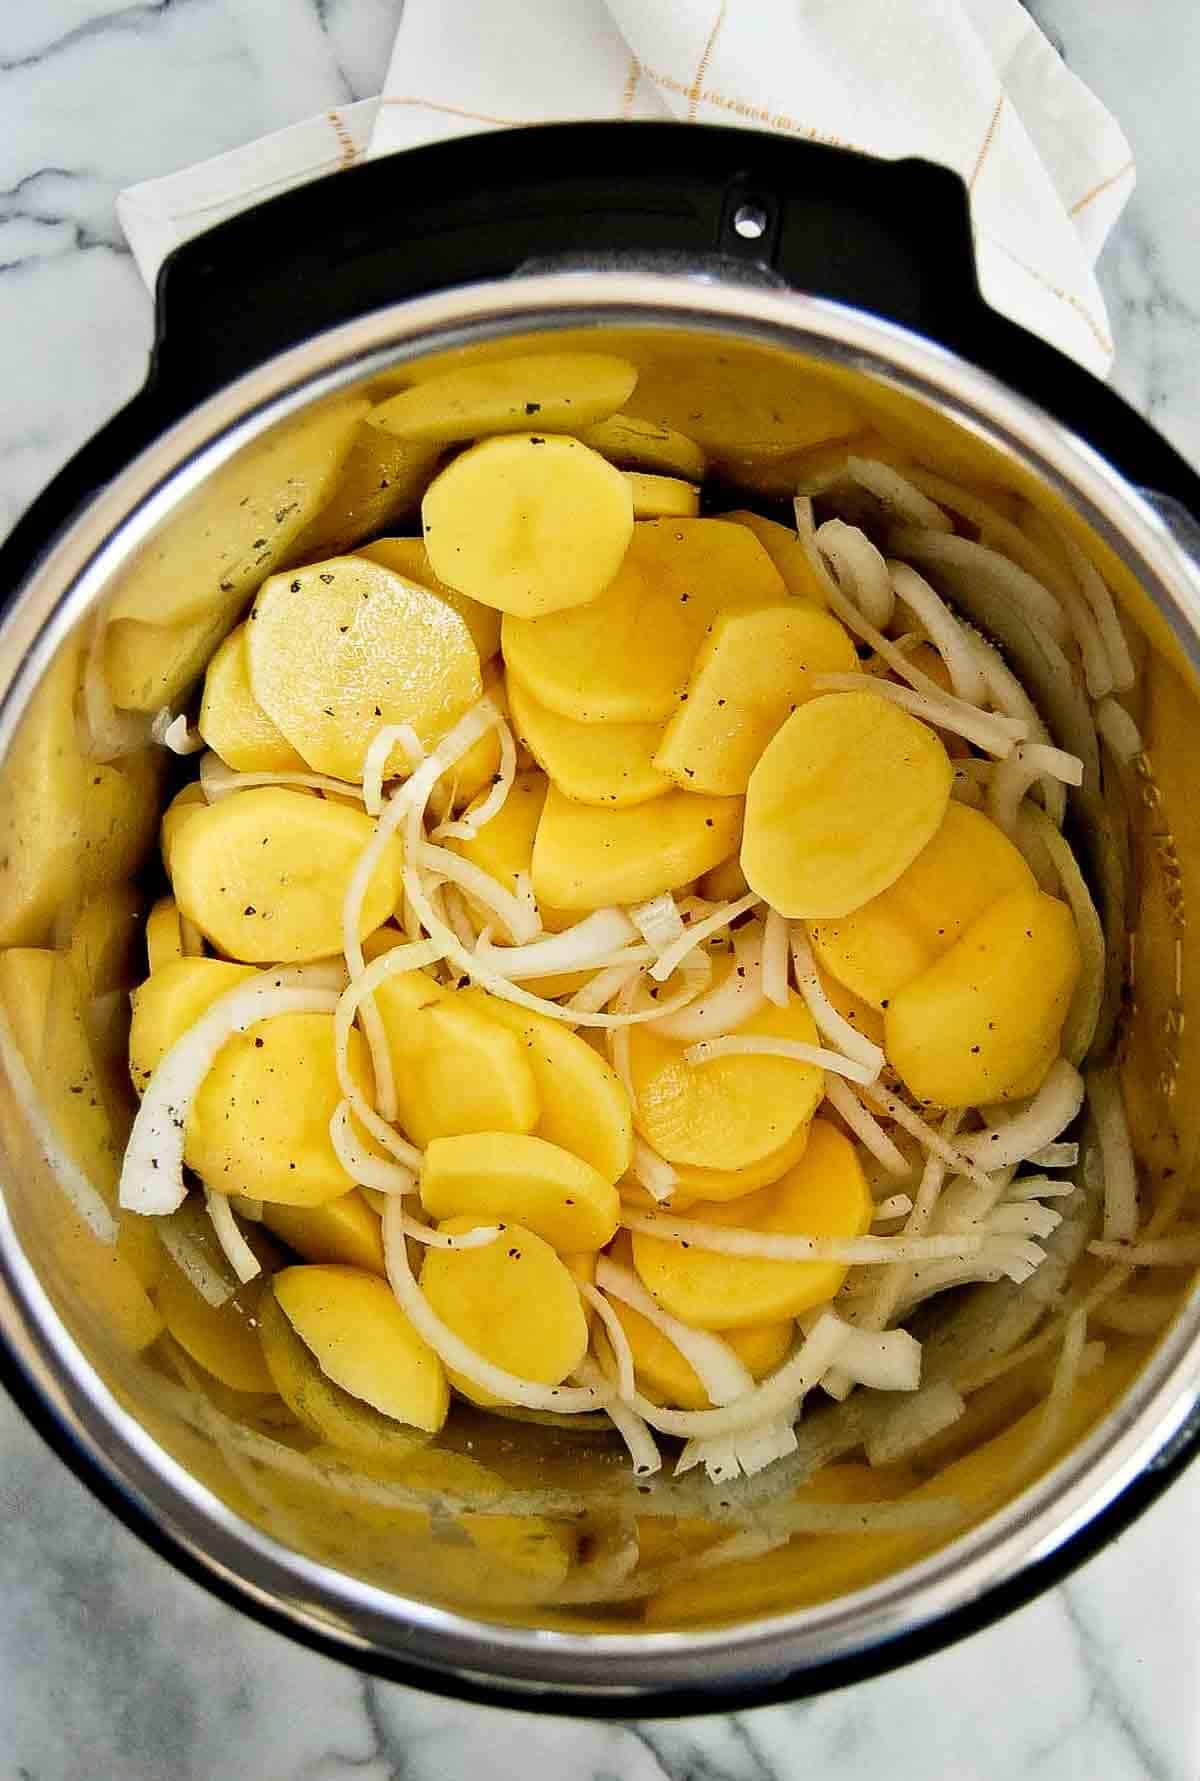 peeled and sliced potatoes and onions in instant pot.